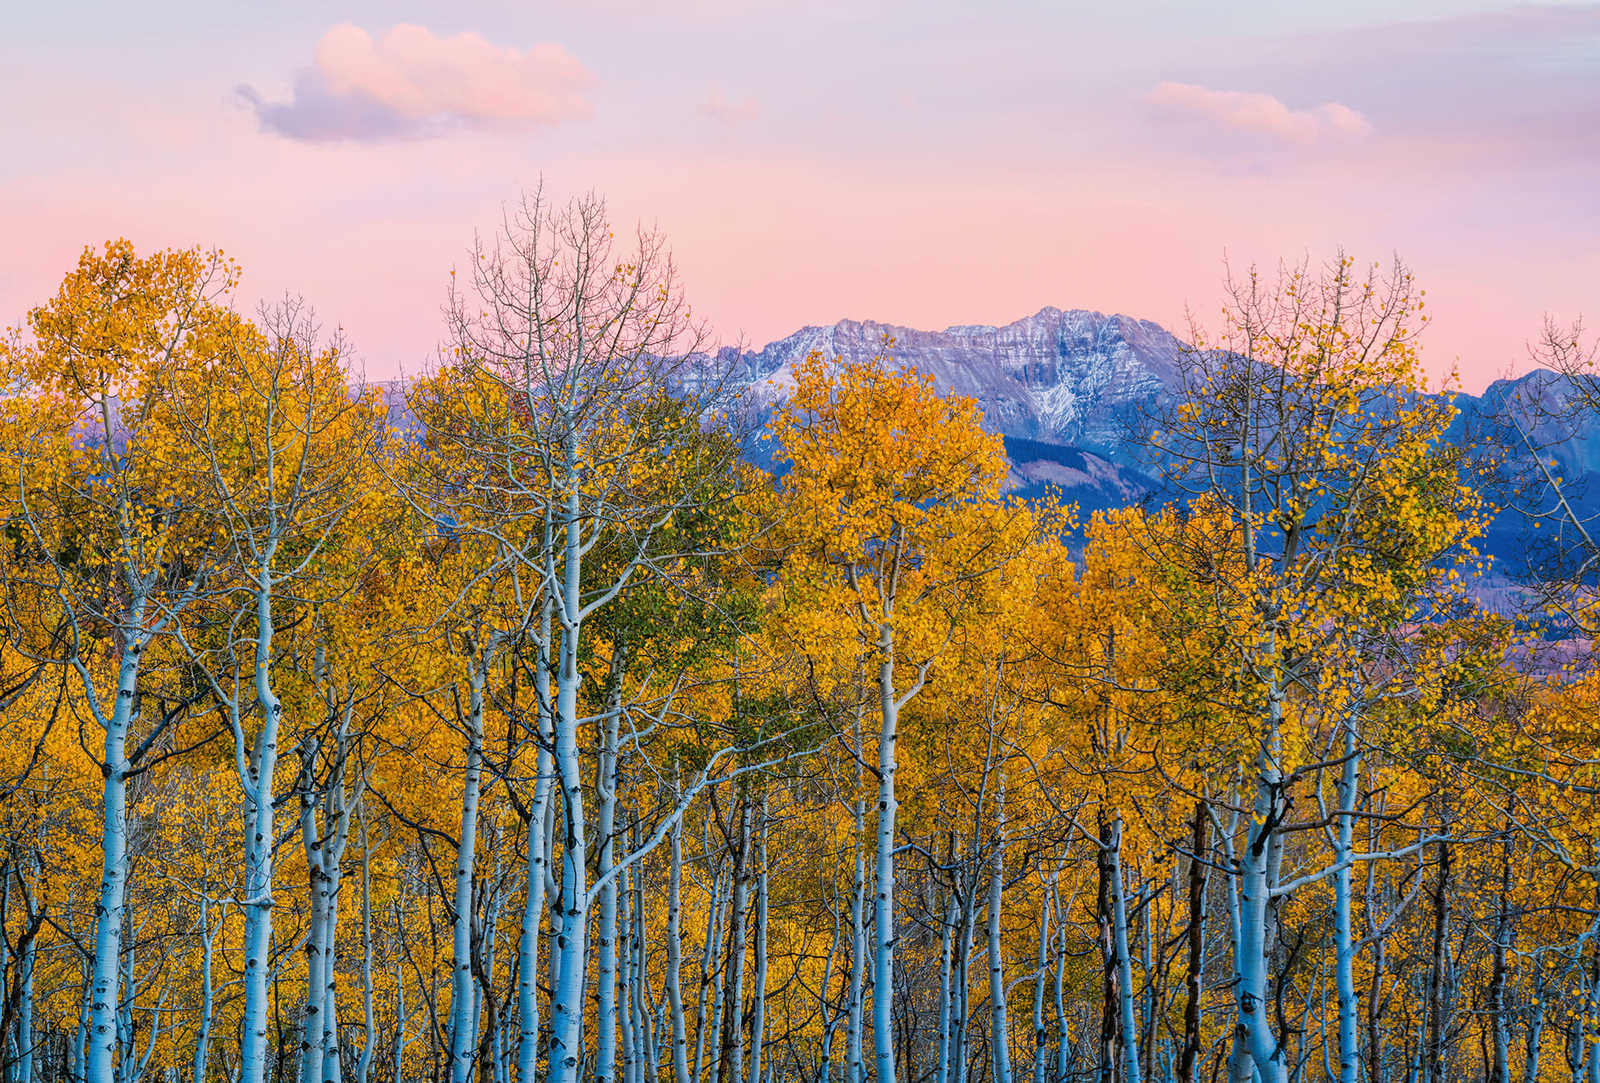         Photo wallpaper landscape birch trees and mountains - yellow, grey
    